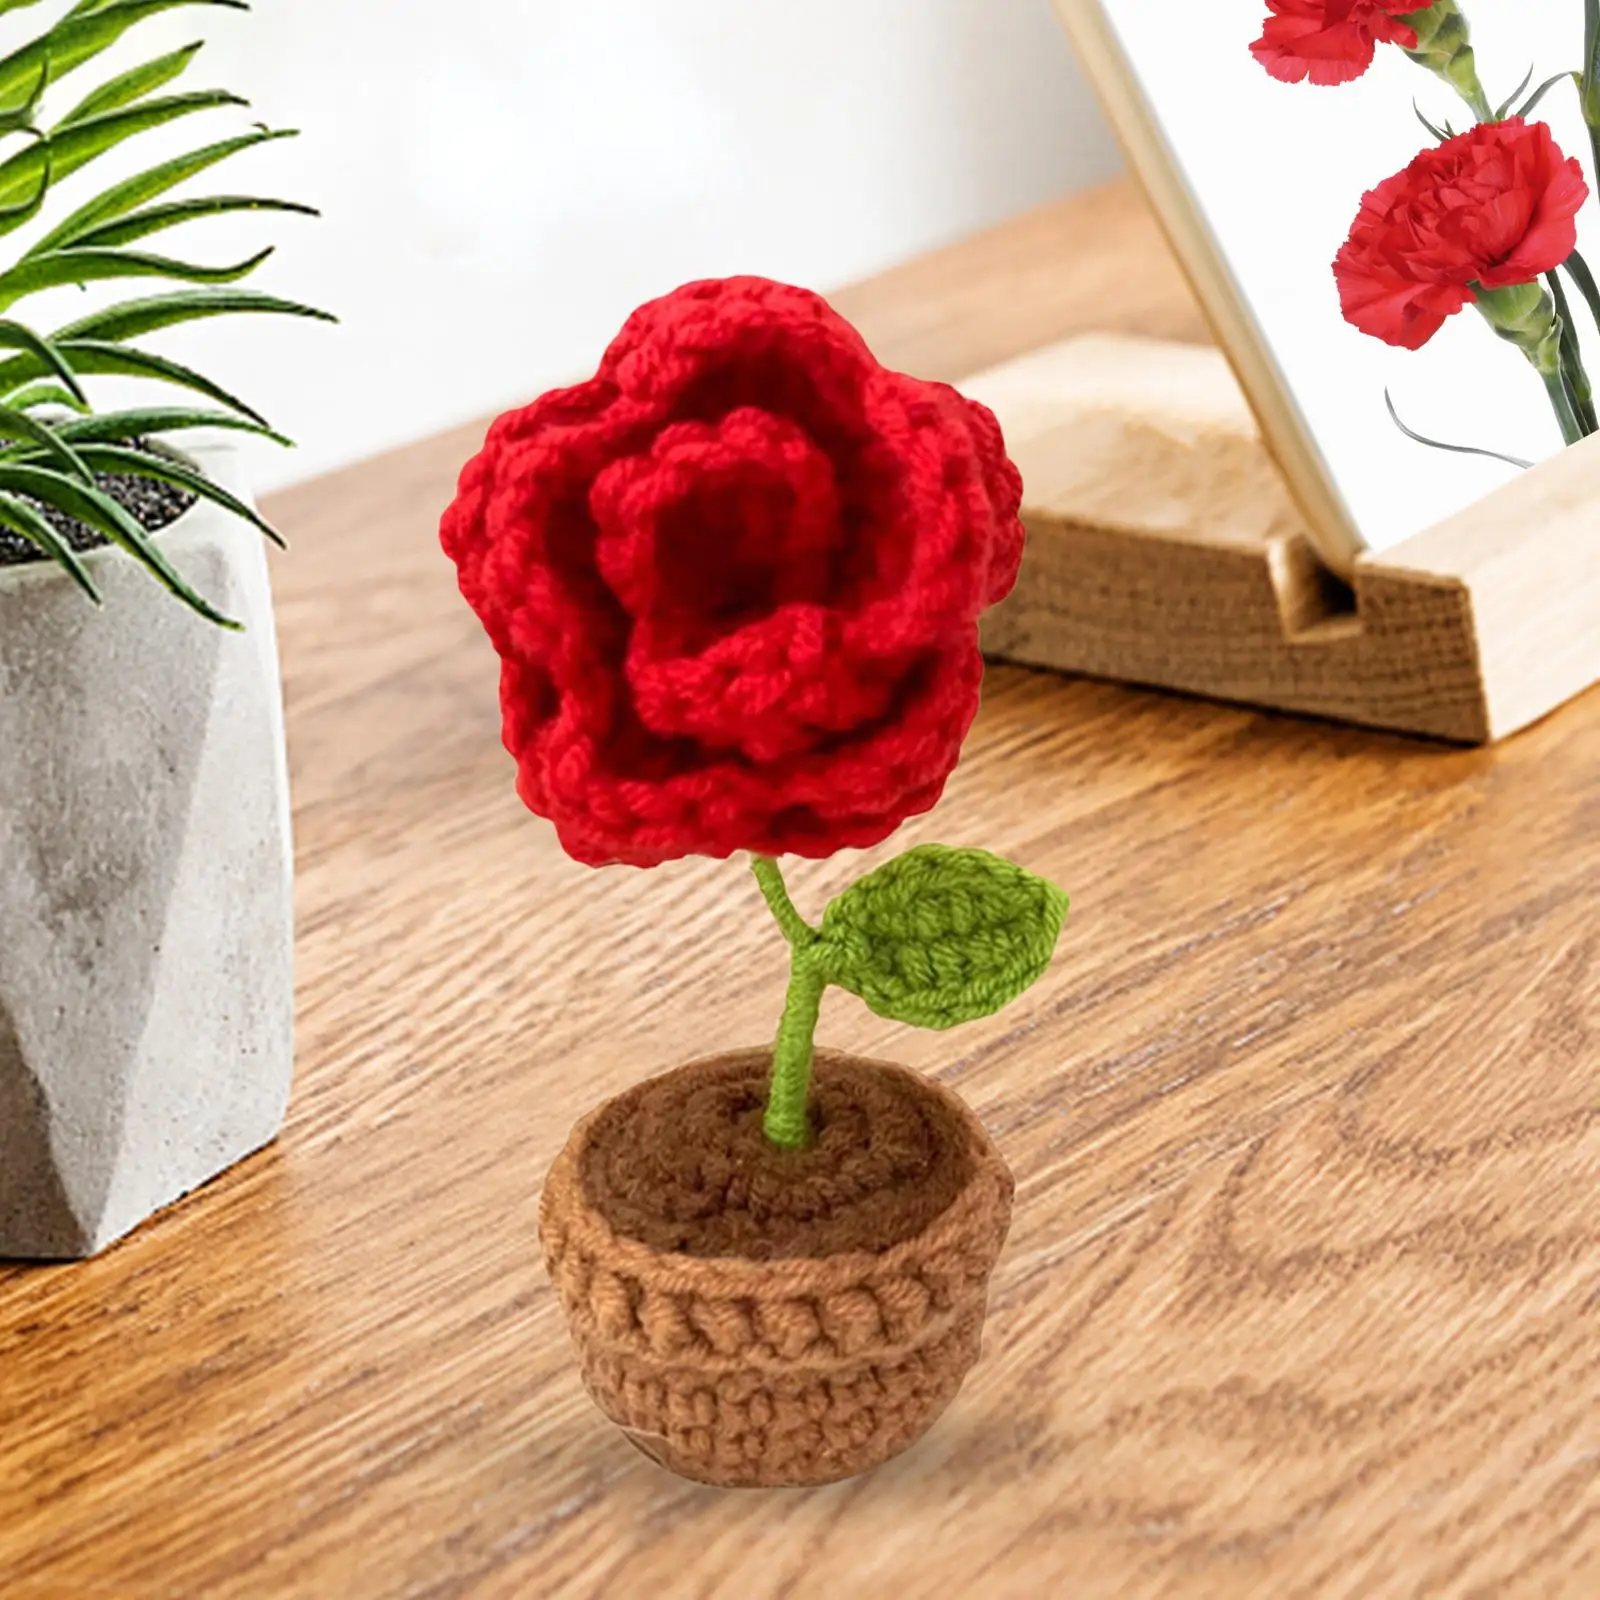 Handmade Crochet Flowers Car Accessories Flowerpot Mini Potted Flowers Dashboard Decoration for Indoor Ornament Birthday Gift